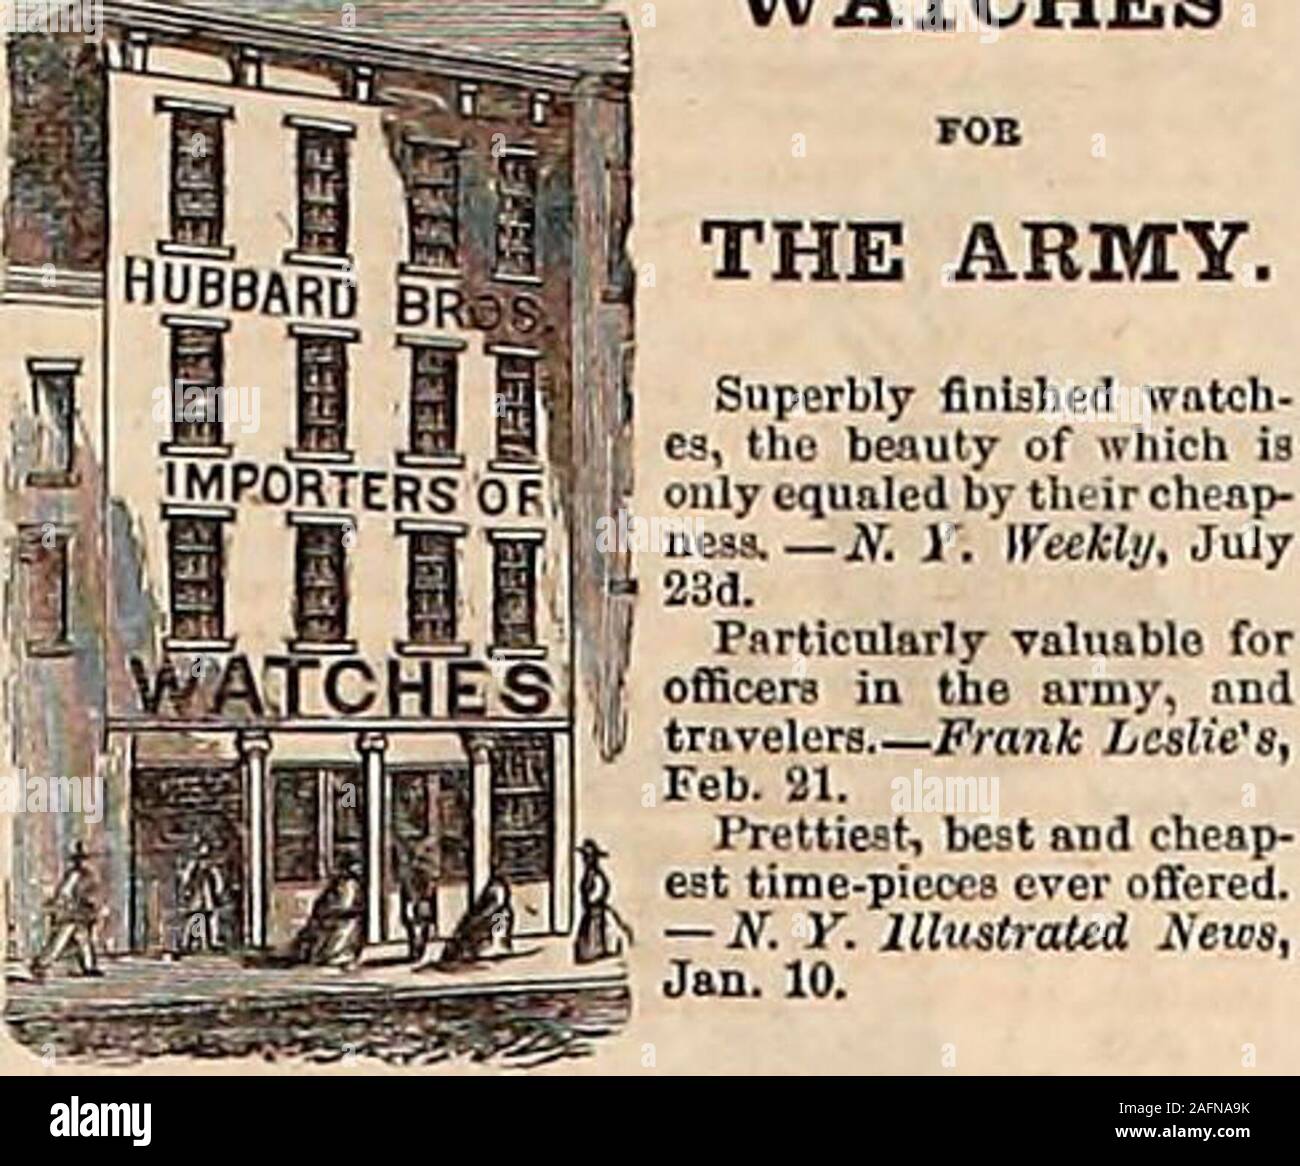 . Harper's weekly. wlr r.. Jo.-EIH liUVT A: CO., ll Iliiv.rsity Il-.o. SOLDIERS C° PINS & CORPS BADGE: ??I..-1 IU.)fJ.&gt; ivn. !,, illi AiTllV, Caution The American WatchCompany. ,r.lly|.. .il.l. for... I, ROBBINS & AFPLETON, Agents for the American Watch Company, 182 BROADWAY, N. Y. SALISBURY, BRO. & CO., v,:v.m.; Military and Naval n.N ;ui.l Hanki.mi Orri.F—ji.mfs. Bik 6 t J. 1II III tly, . I.ili , X..-.. Lip , M.nlli, Printing-Press for Sale. Apply to HARI B DRR.GOODALES CATARRH REMEDY. $50 for $20. SOLDIERS IN THE ARMY. &3SWI1: ?*,r*.;r..... wni.r,,. ;lIl,i v, ?,.,, . inlopa, ml P.par BKi Stock Photo